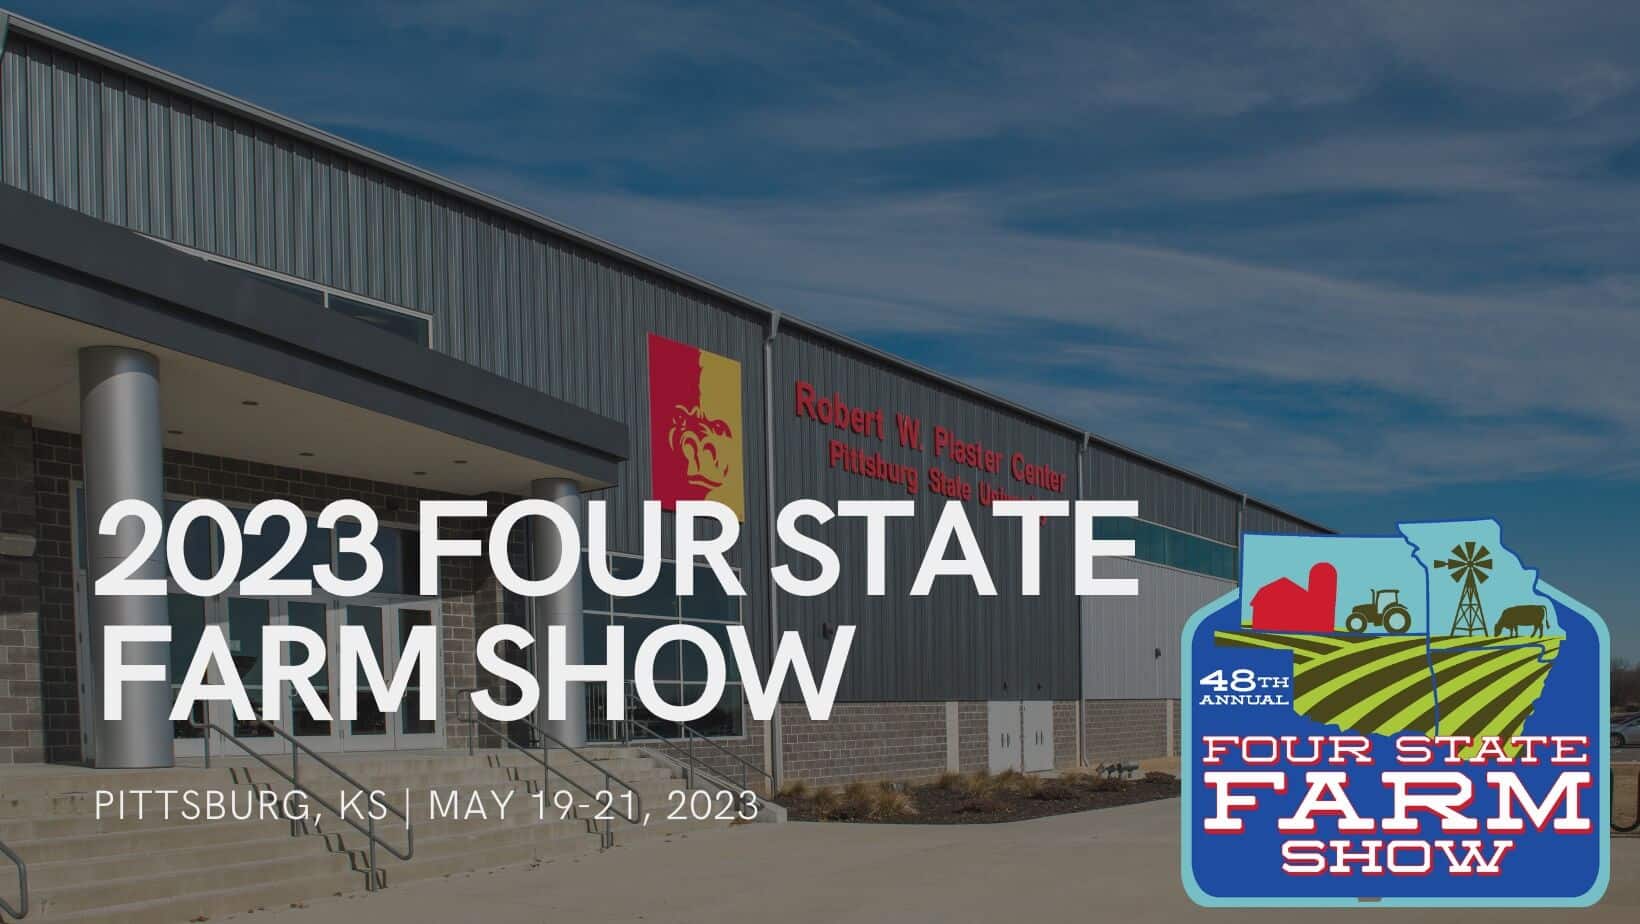 48th Annual Four State Farm Show Stay Tuff Fence